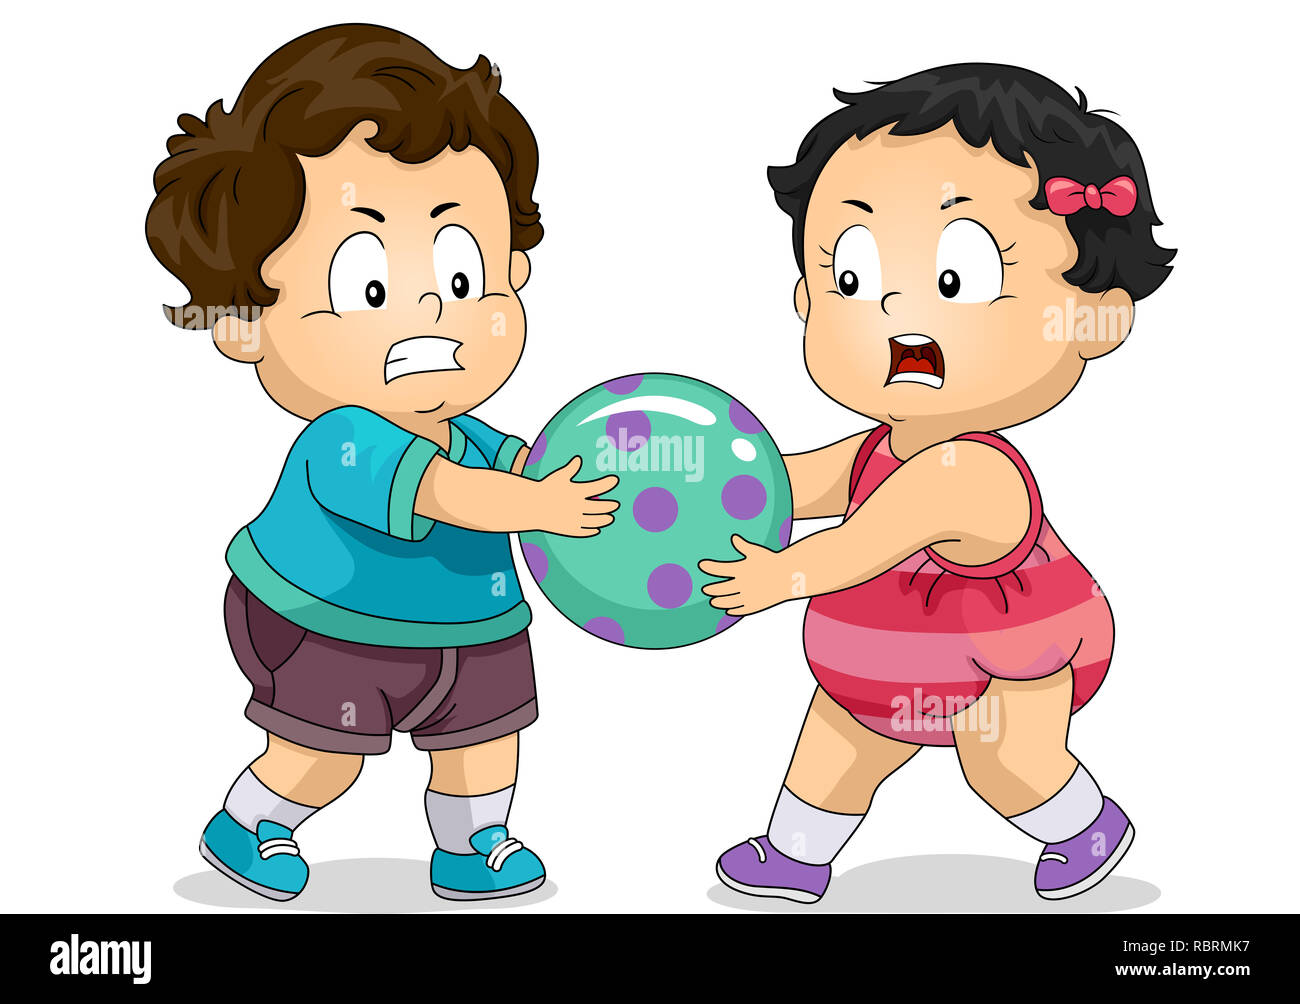 Illustration of Kids Toddlers Fighting Over a Ball Stock Photo